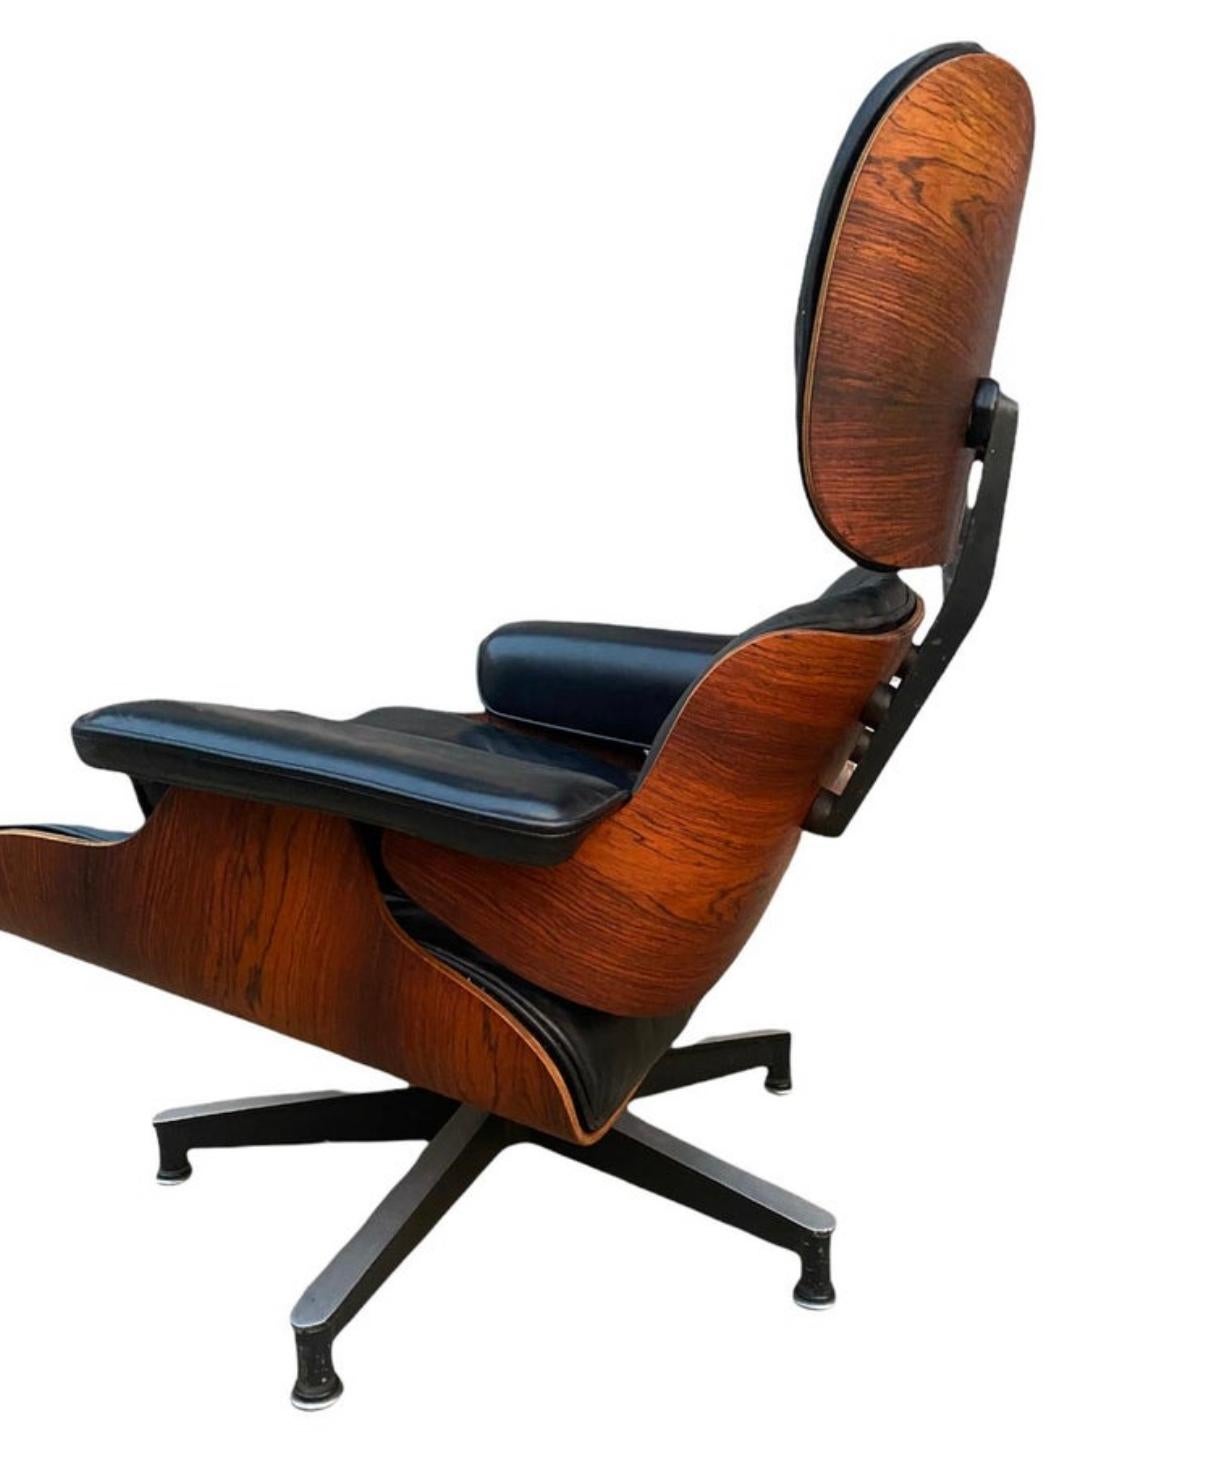 Classic Herman Miller Eames lounge chair and ottoman. Early edition circa 1960s. Executed in black leather and gorgeous toned and figured wood frame. Seat panel has been outfitted with new rubber shock mounts (all chairs eventually need this and it